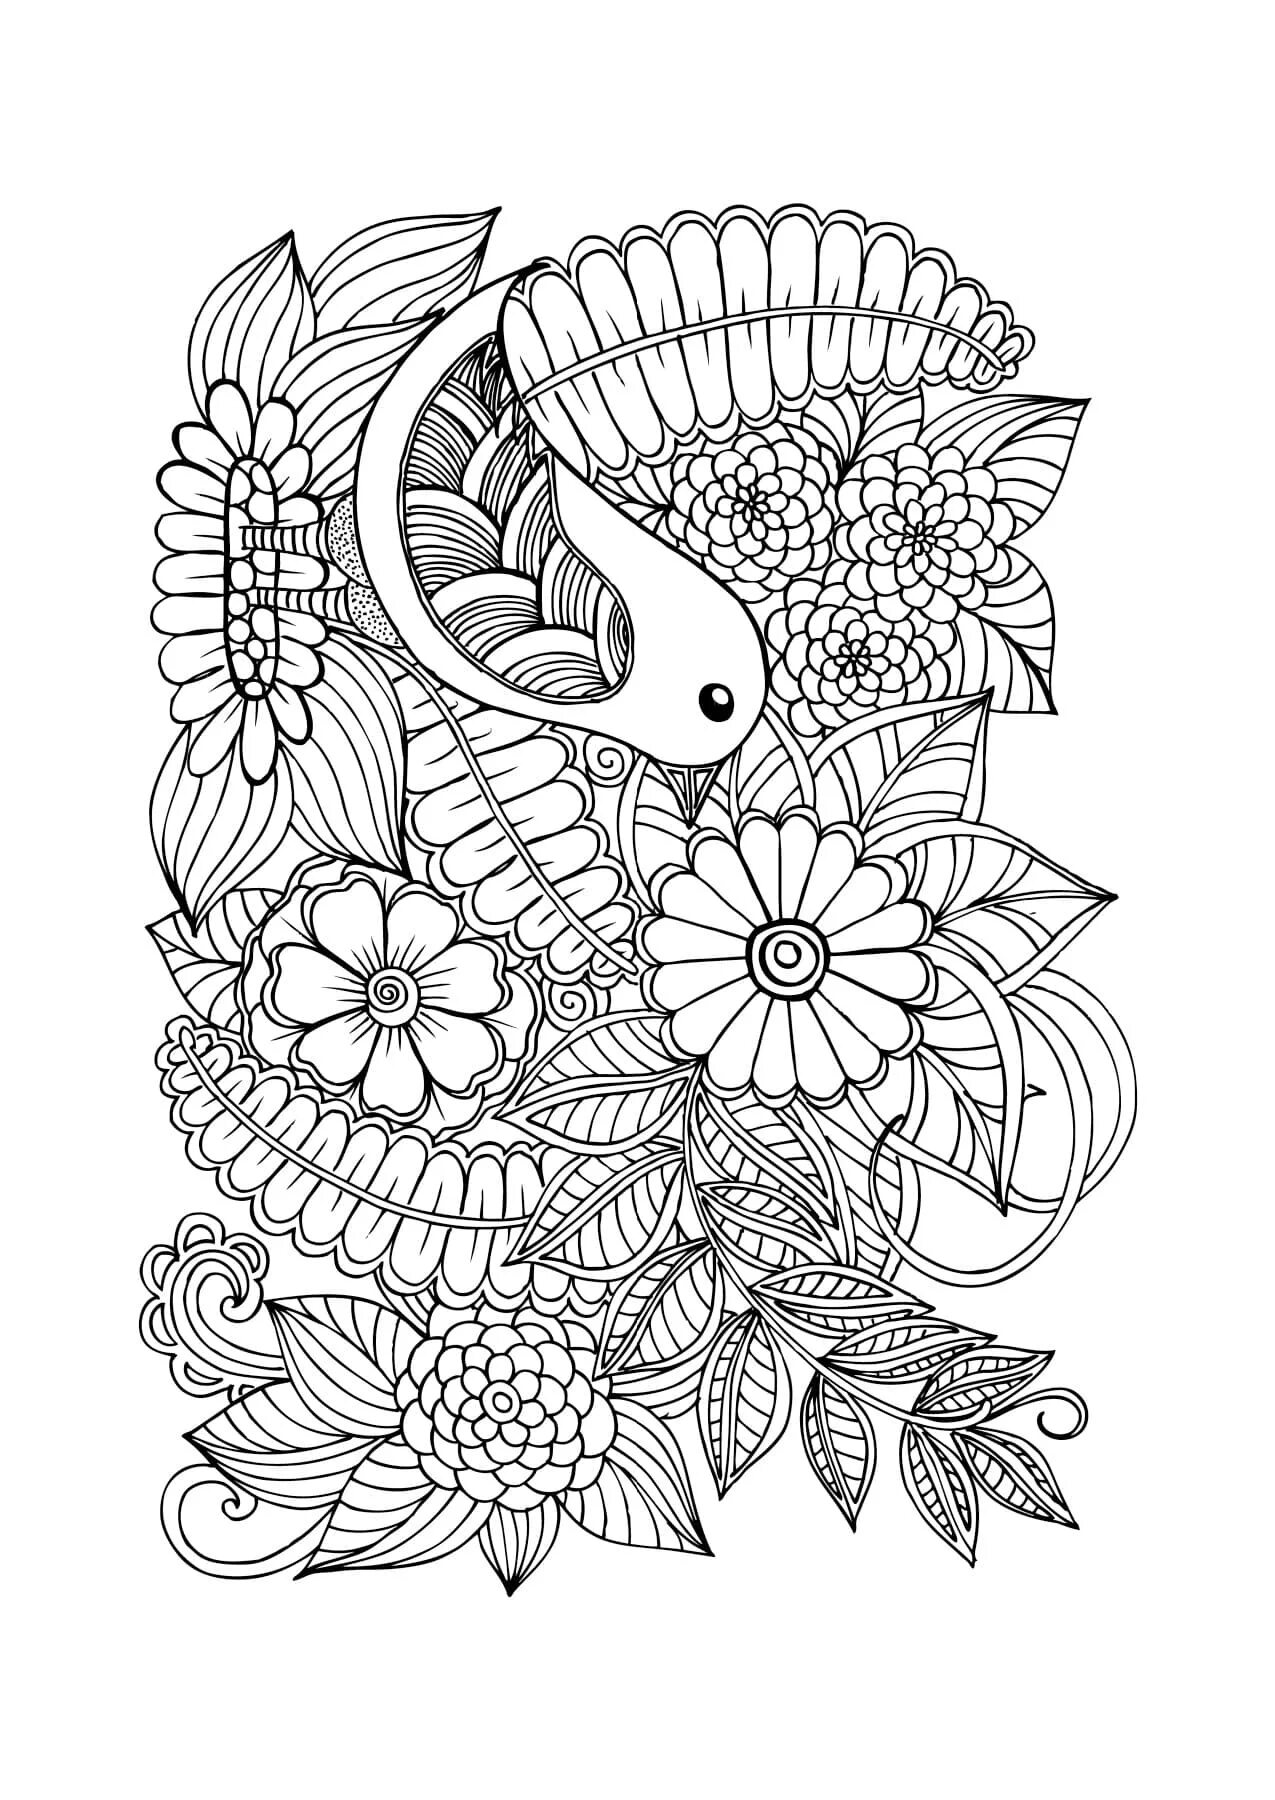 Funny spring anti-stress coloring book